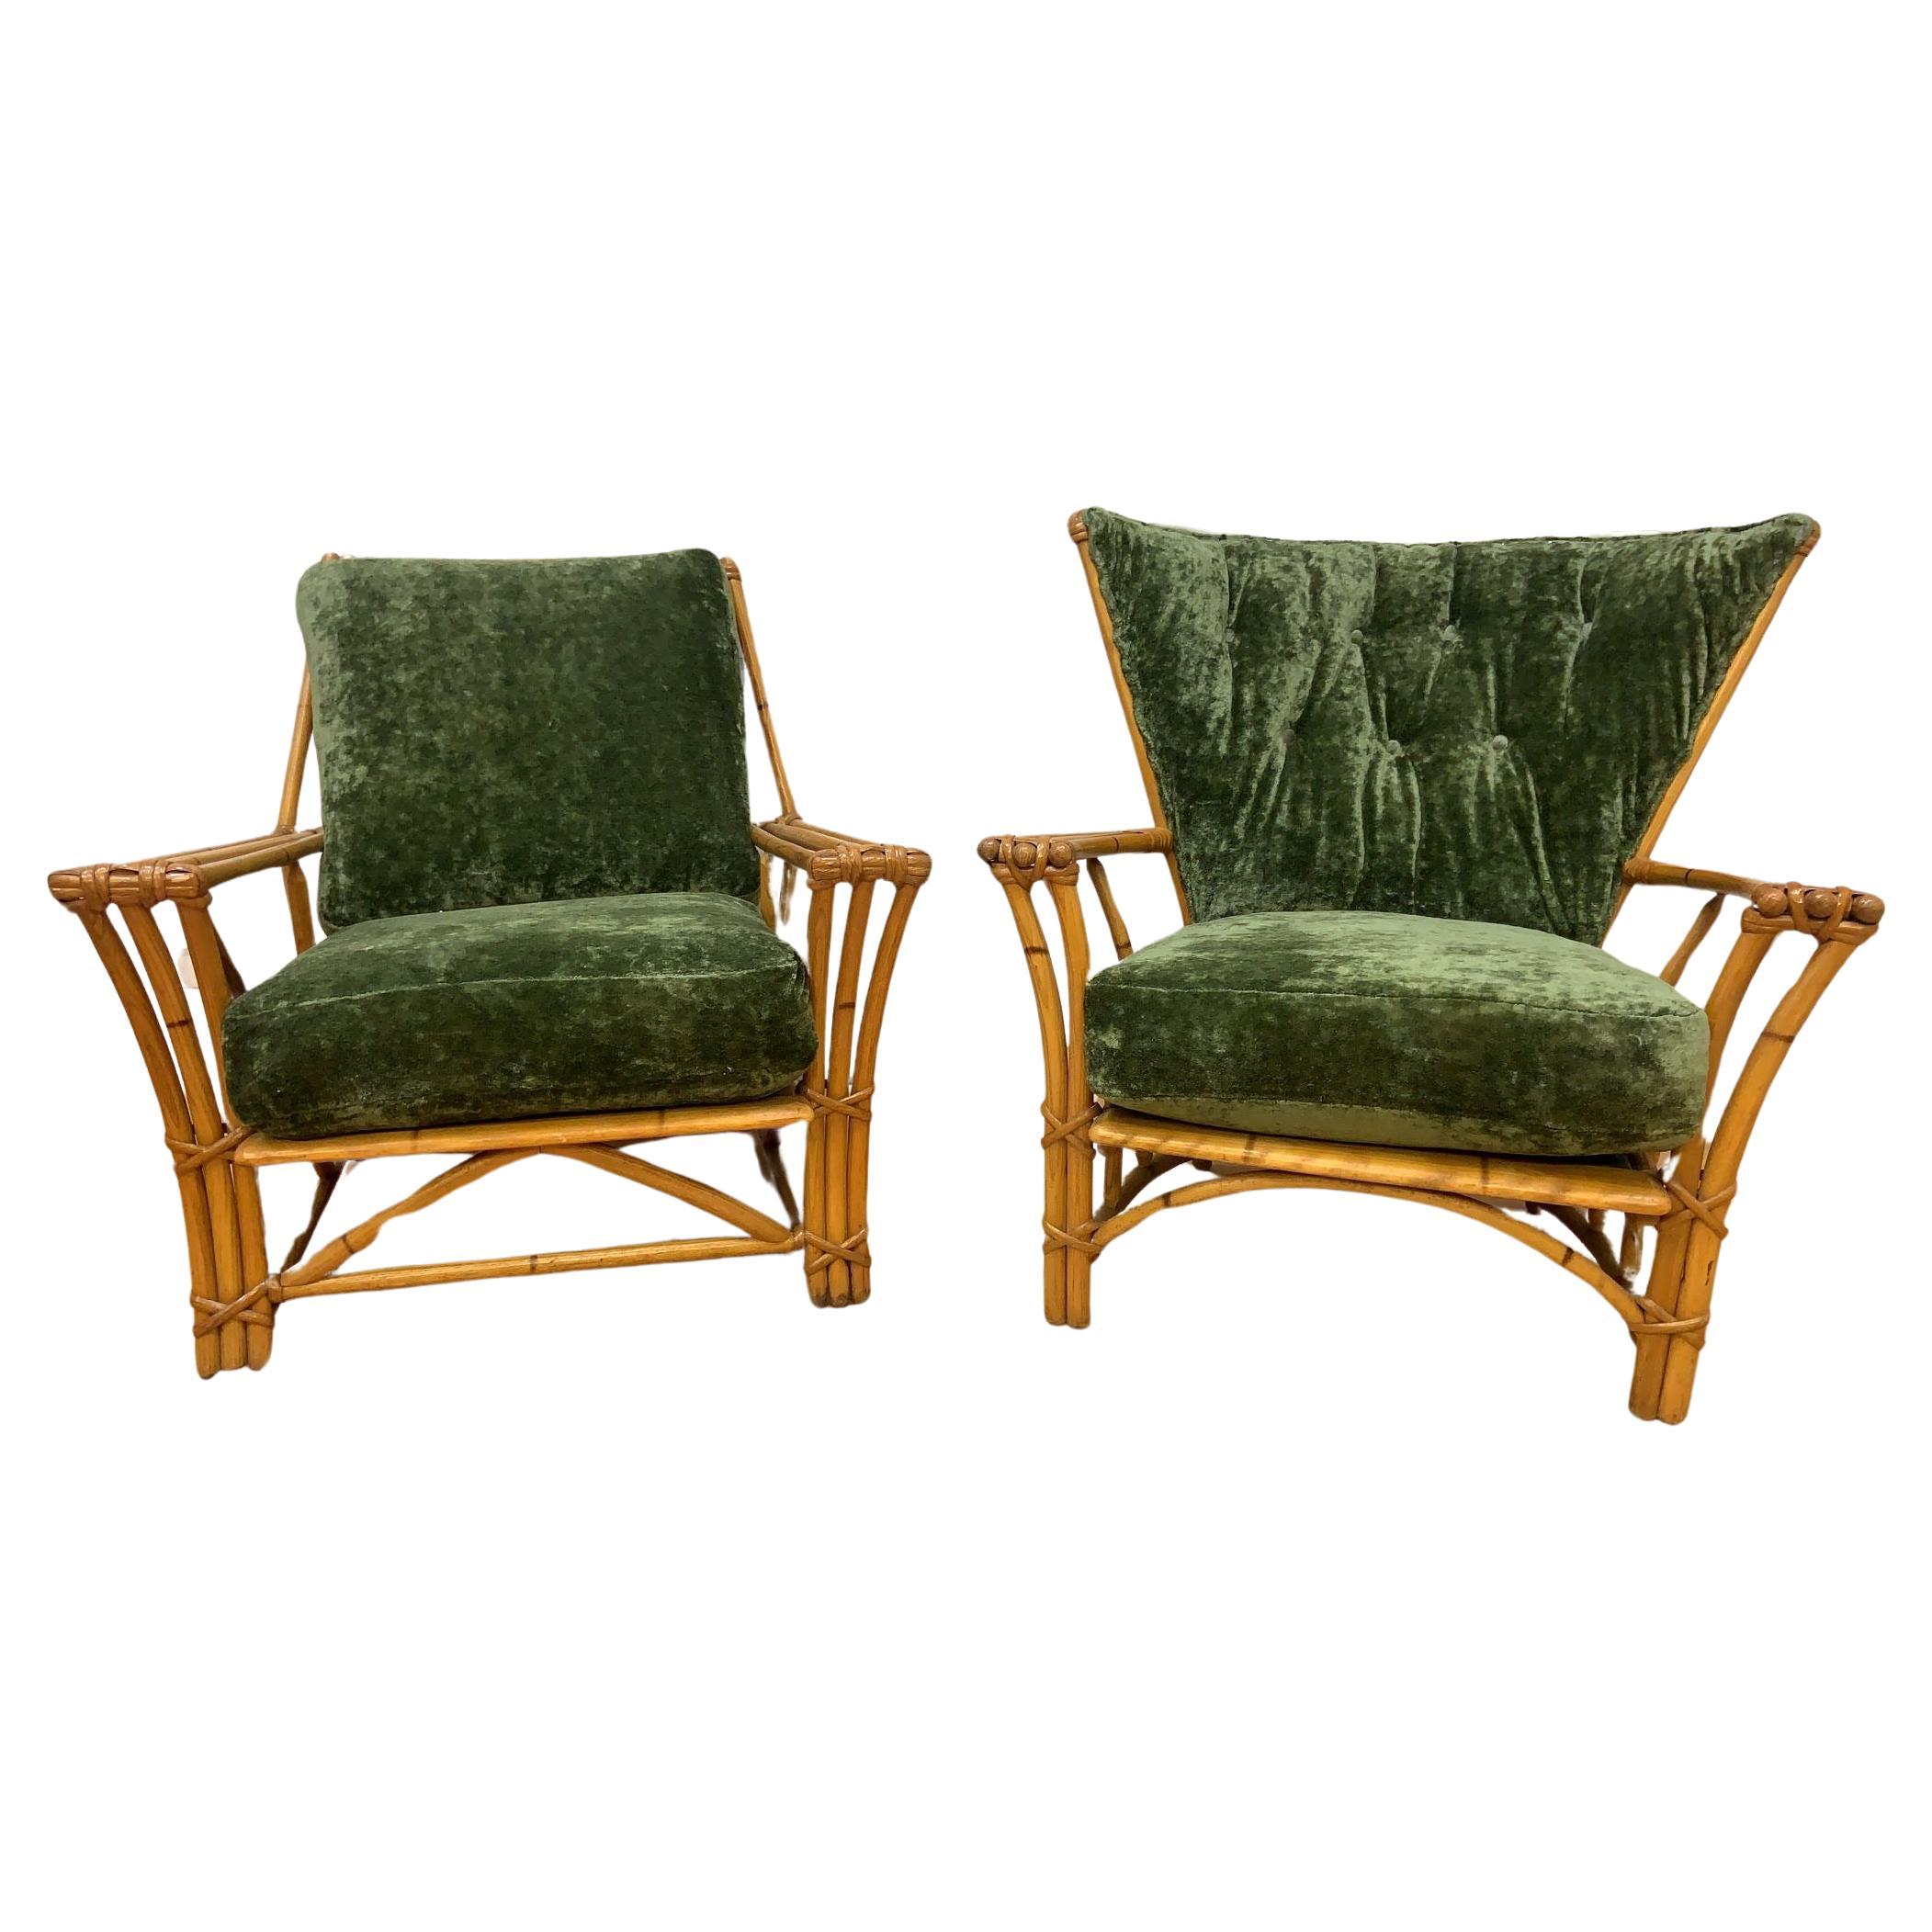 MCM Heywood Wakefield Ashcraft Rattan Lounge Chairs Newly Upholstered - Set of 2 For Sale